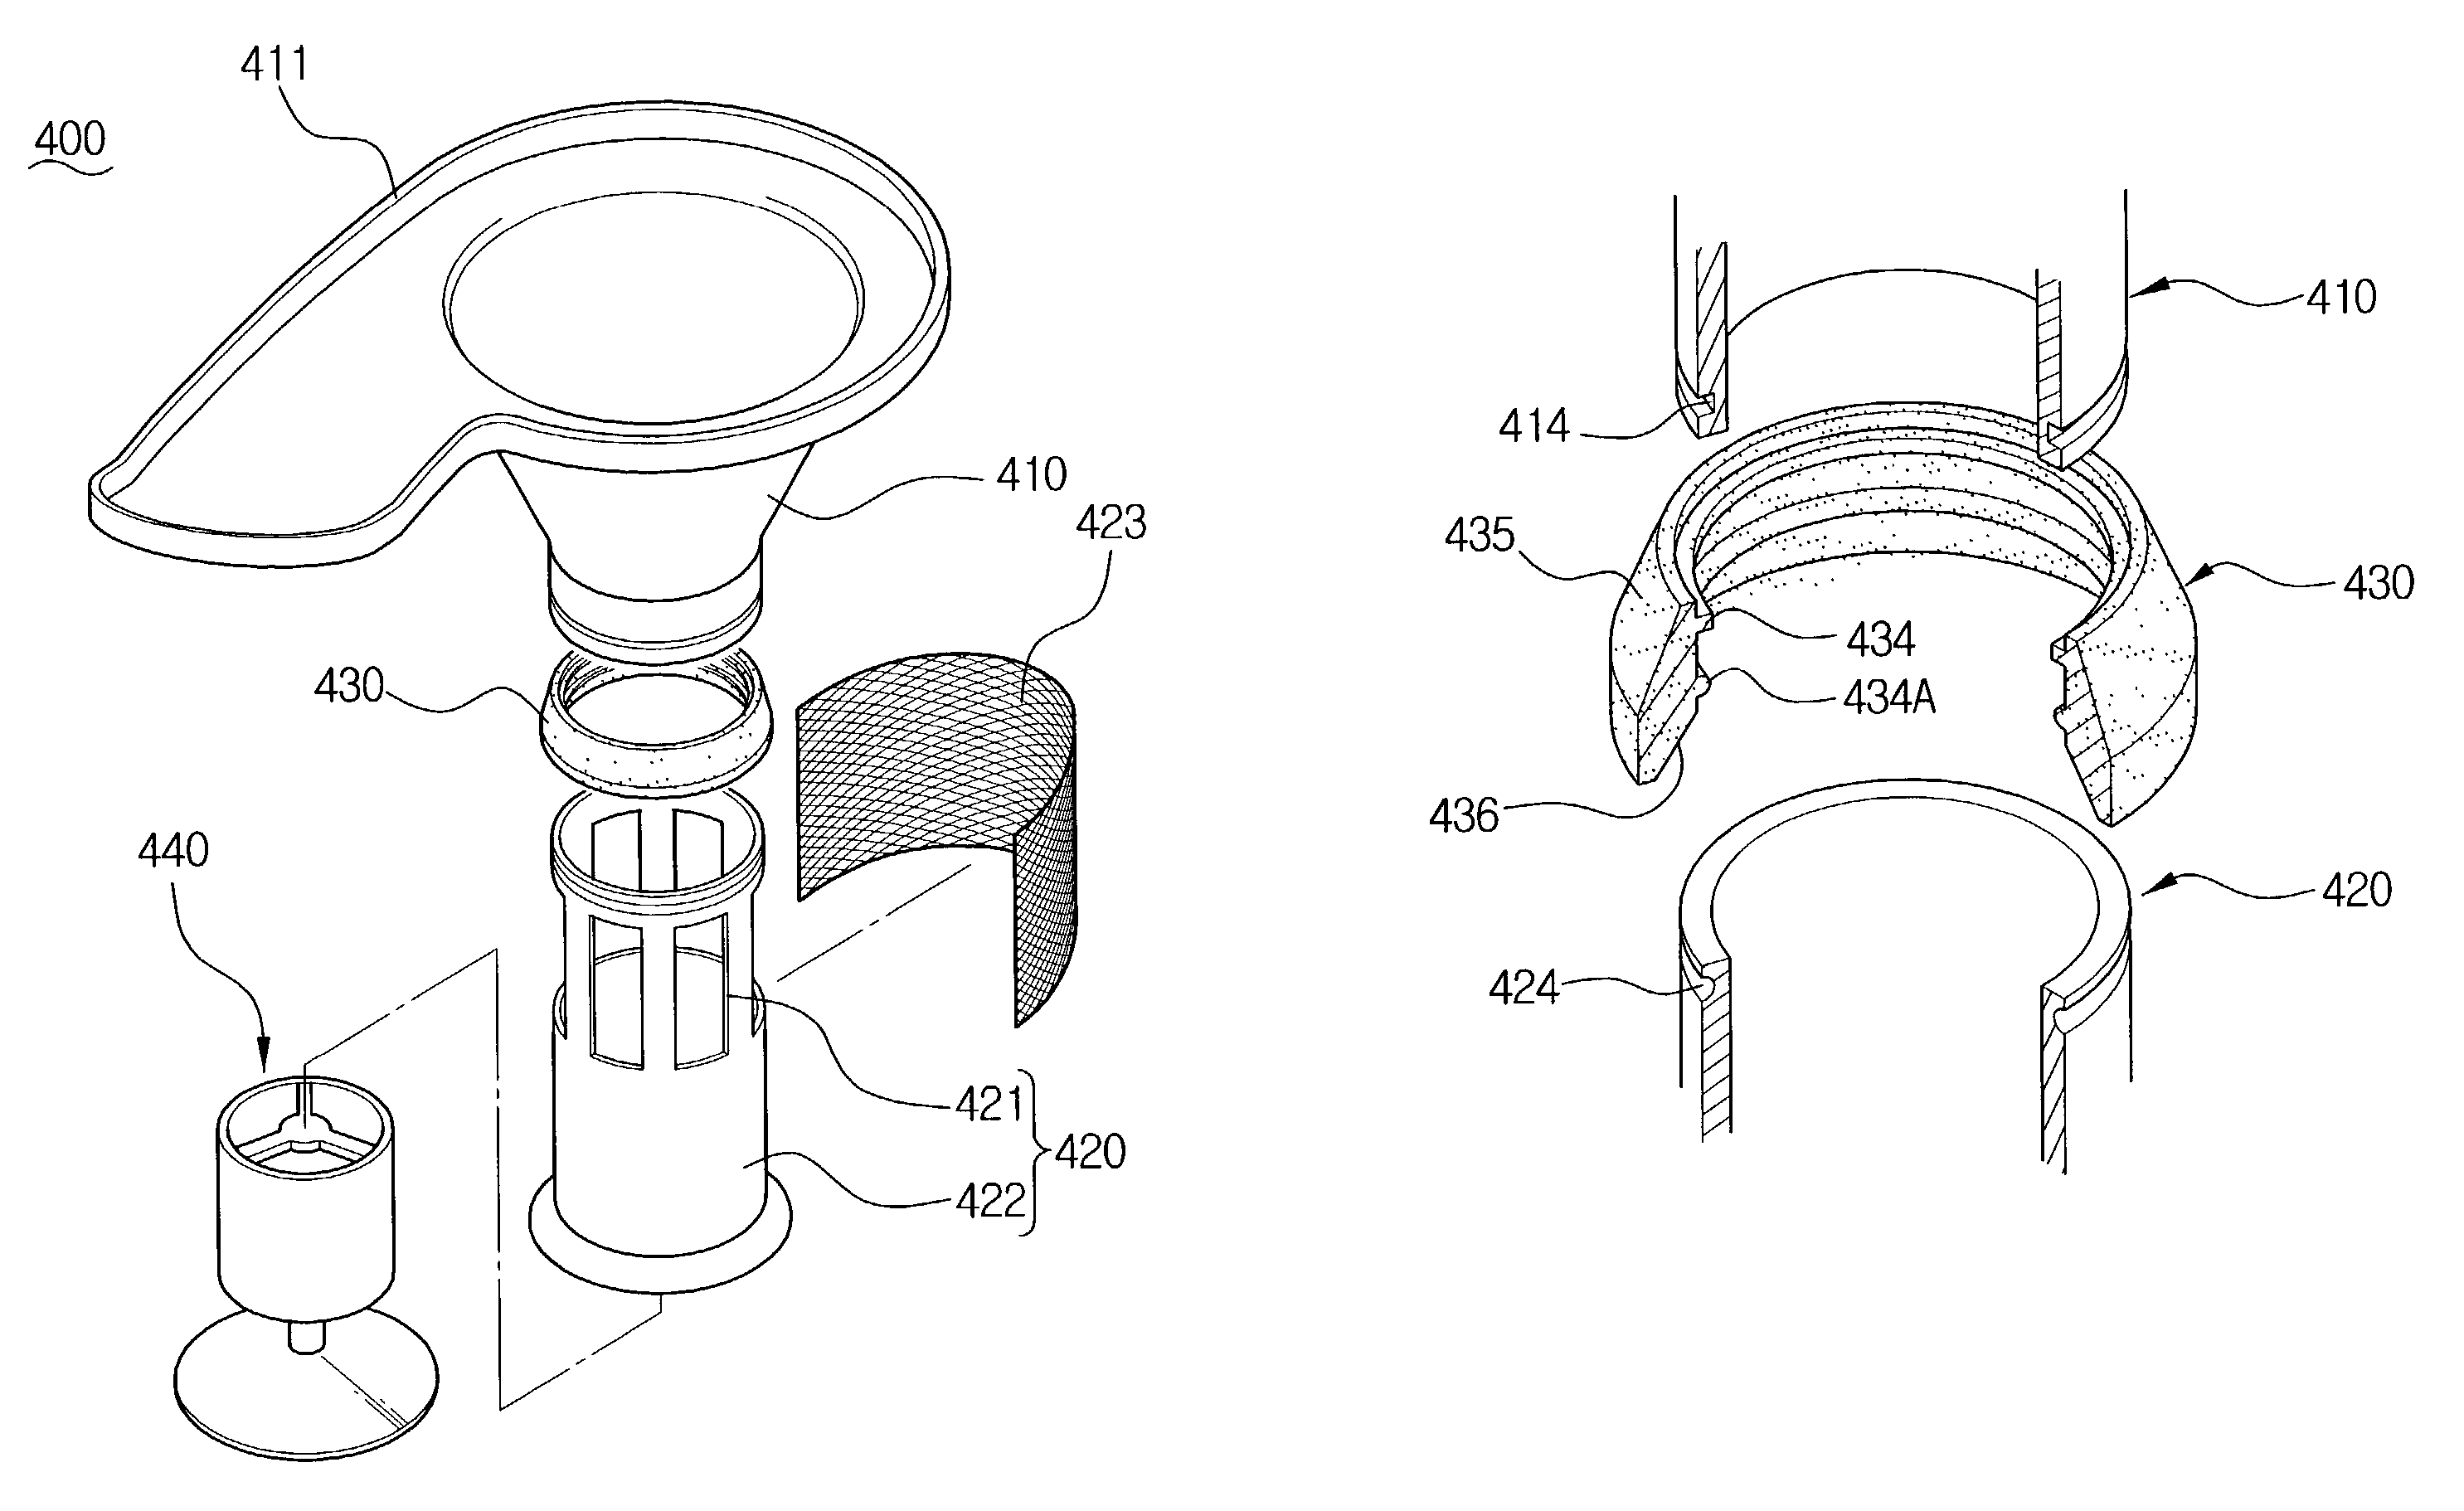 Cyclone-type dust-collecting apparatus for vacuum cleaner